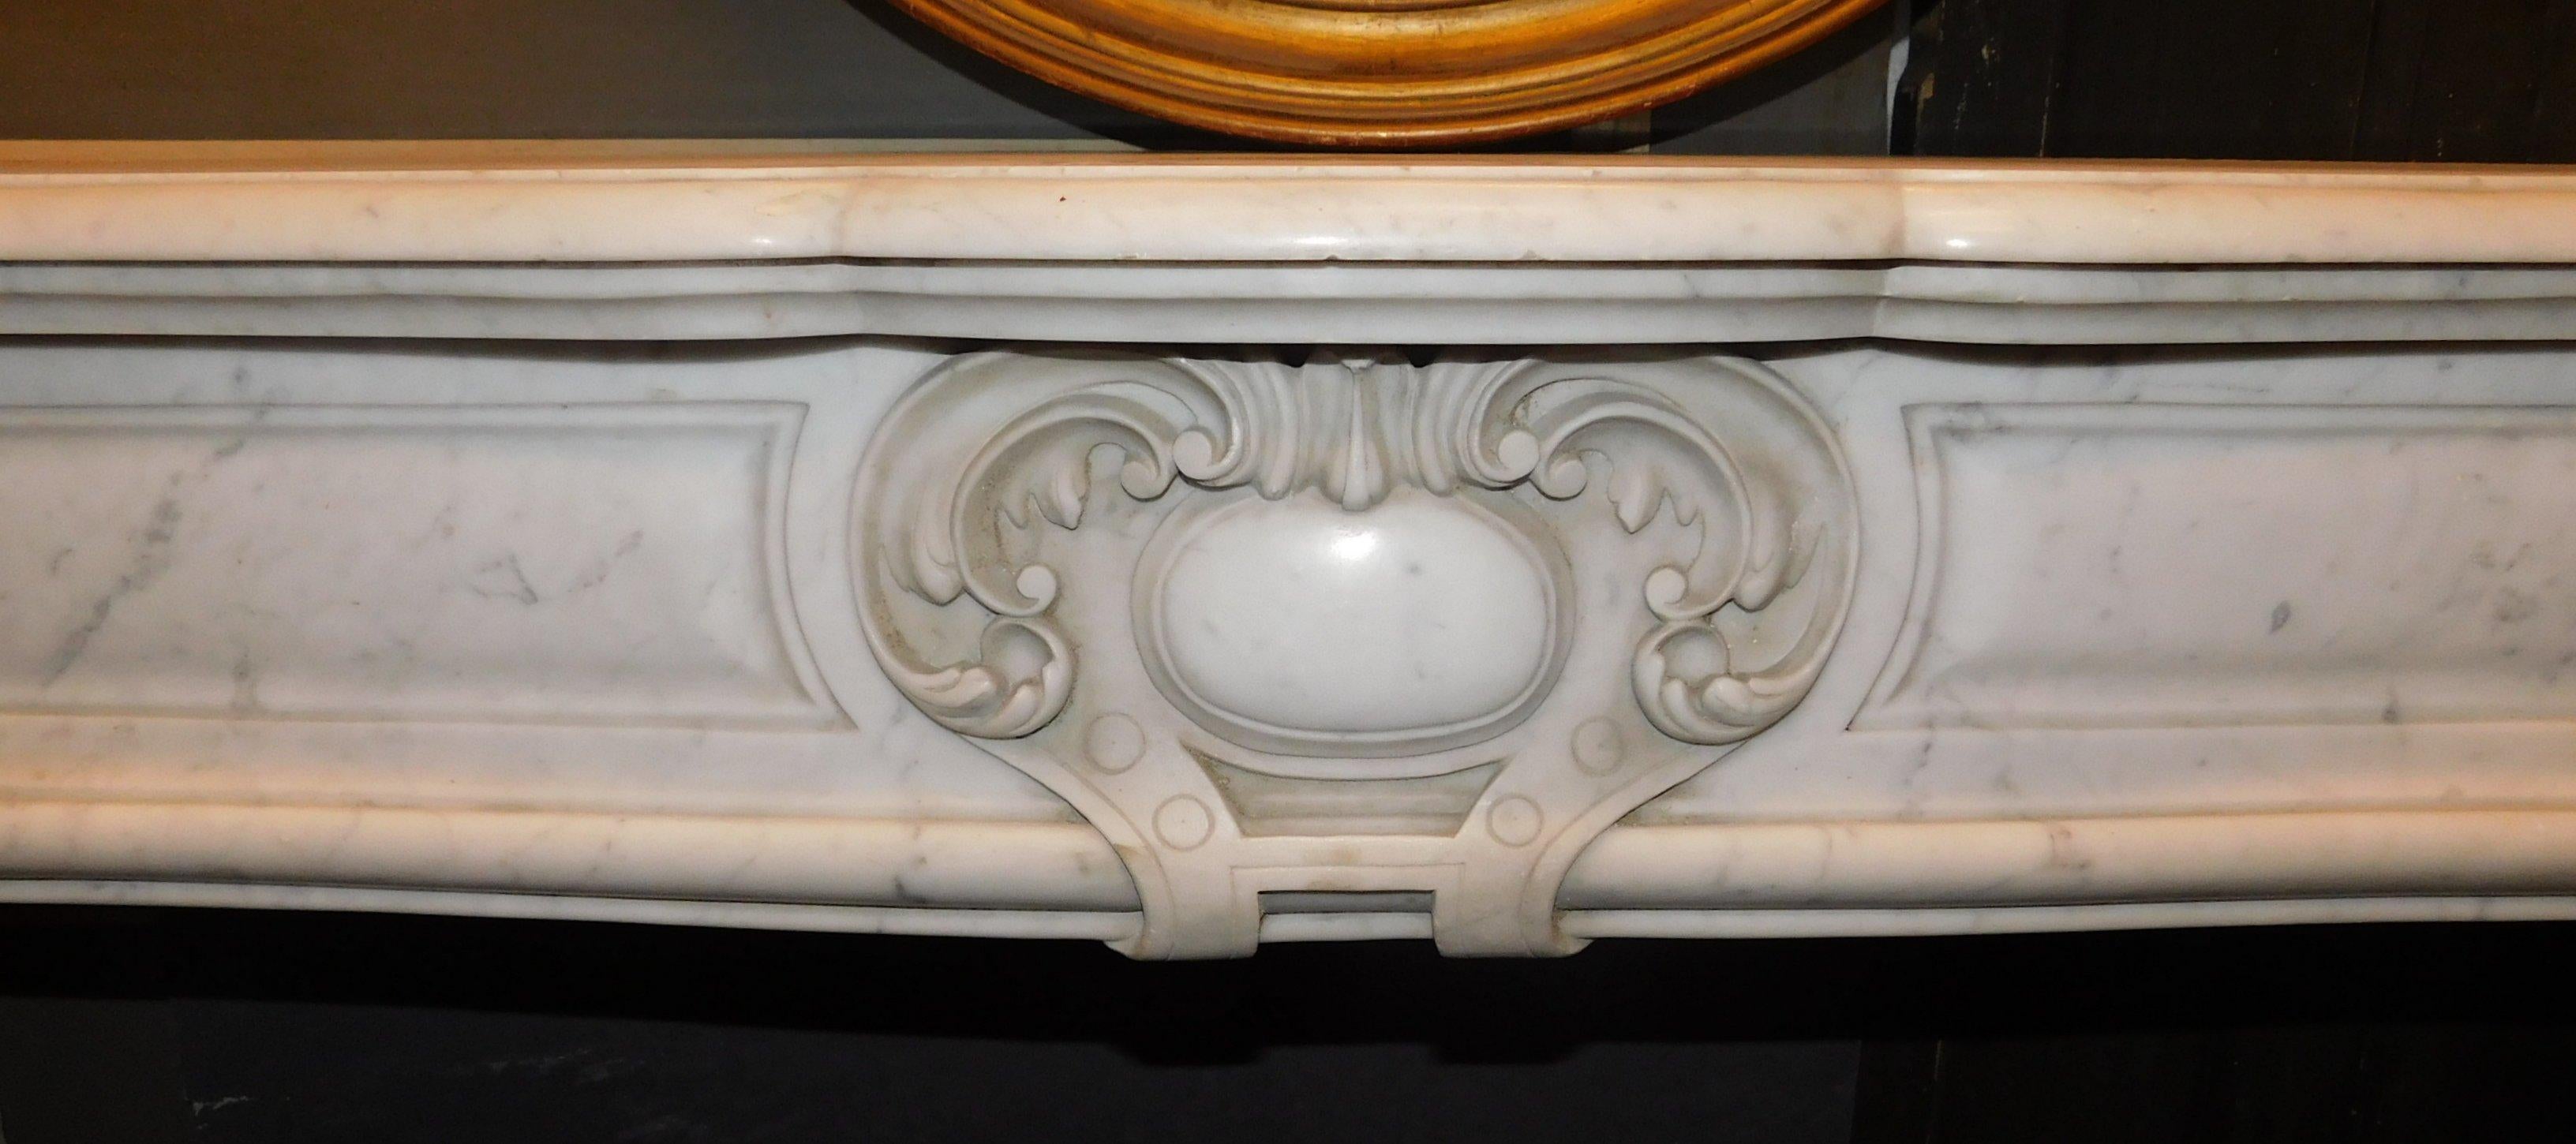 19th Century Antqiue Fireplace Mantel in White Carrara Marble, 1800 Italy